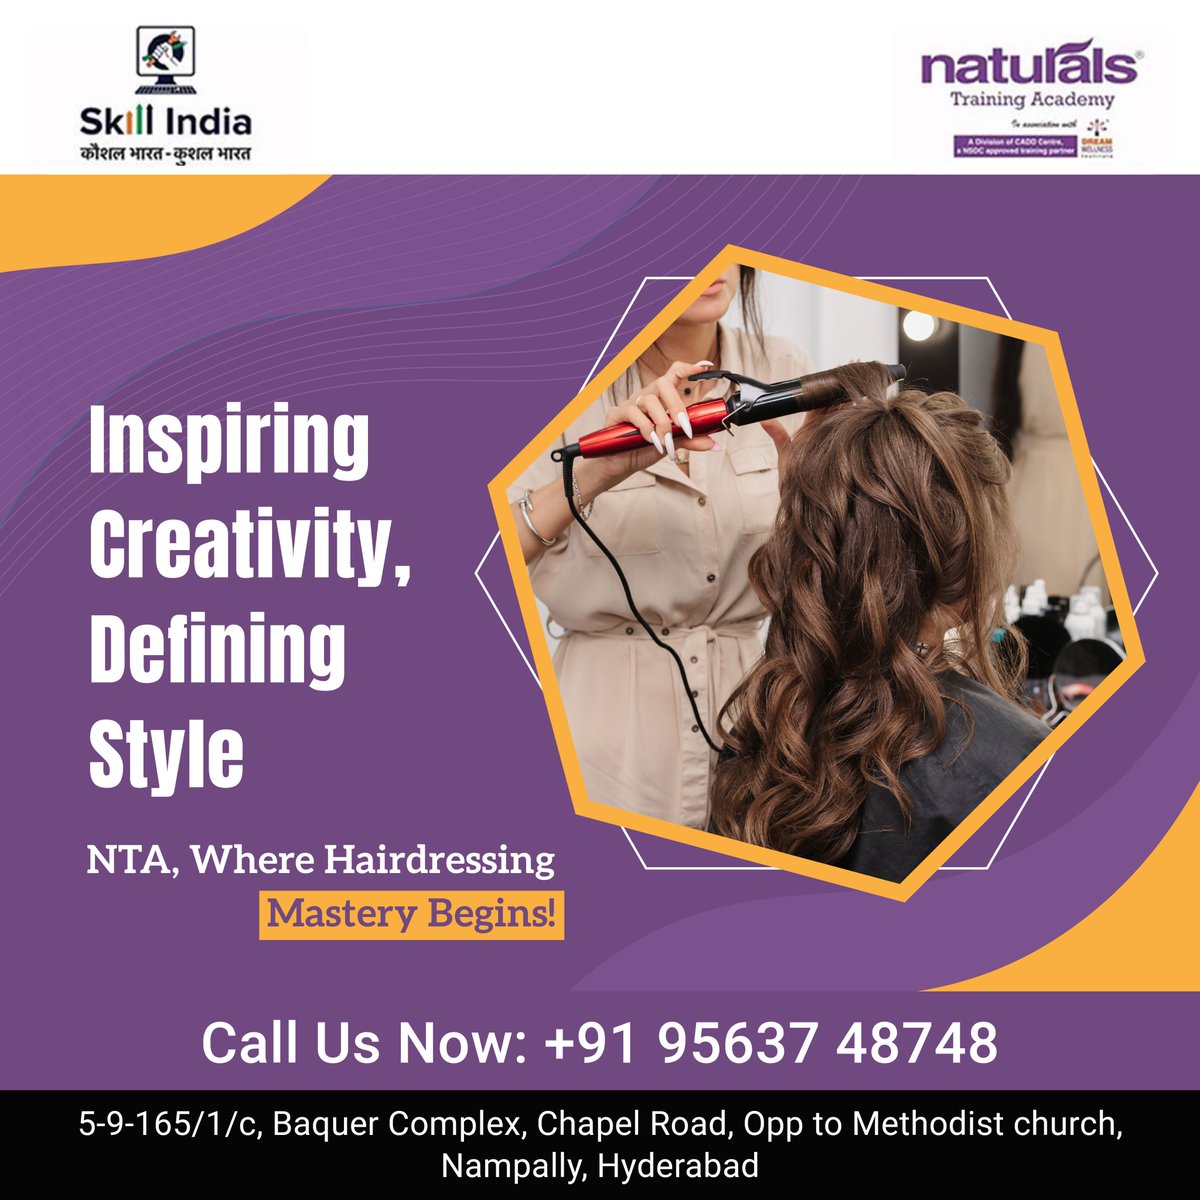 Naturals Training Academy (NTA) is where hairdressing mastery begins, inspiring creativity and defining style. Contact Us: 95637 48748 #hairdressingmastery #hairtraining #hairstyling #naturalstrainingacademy #nta #nampally #hyderabad